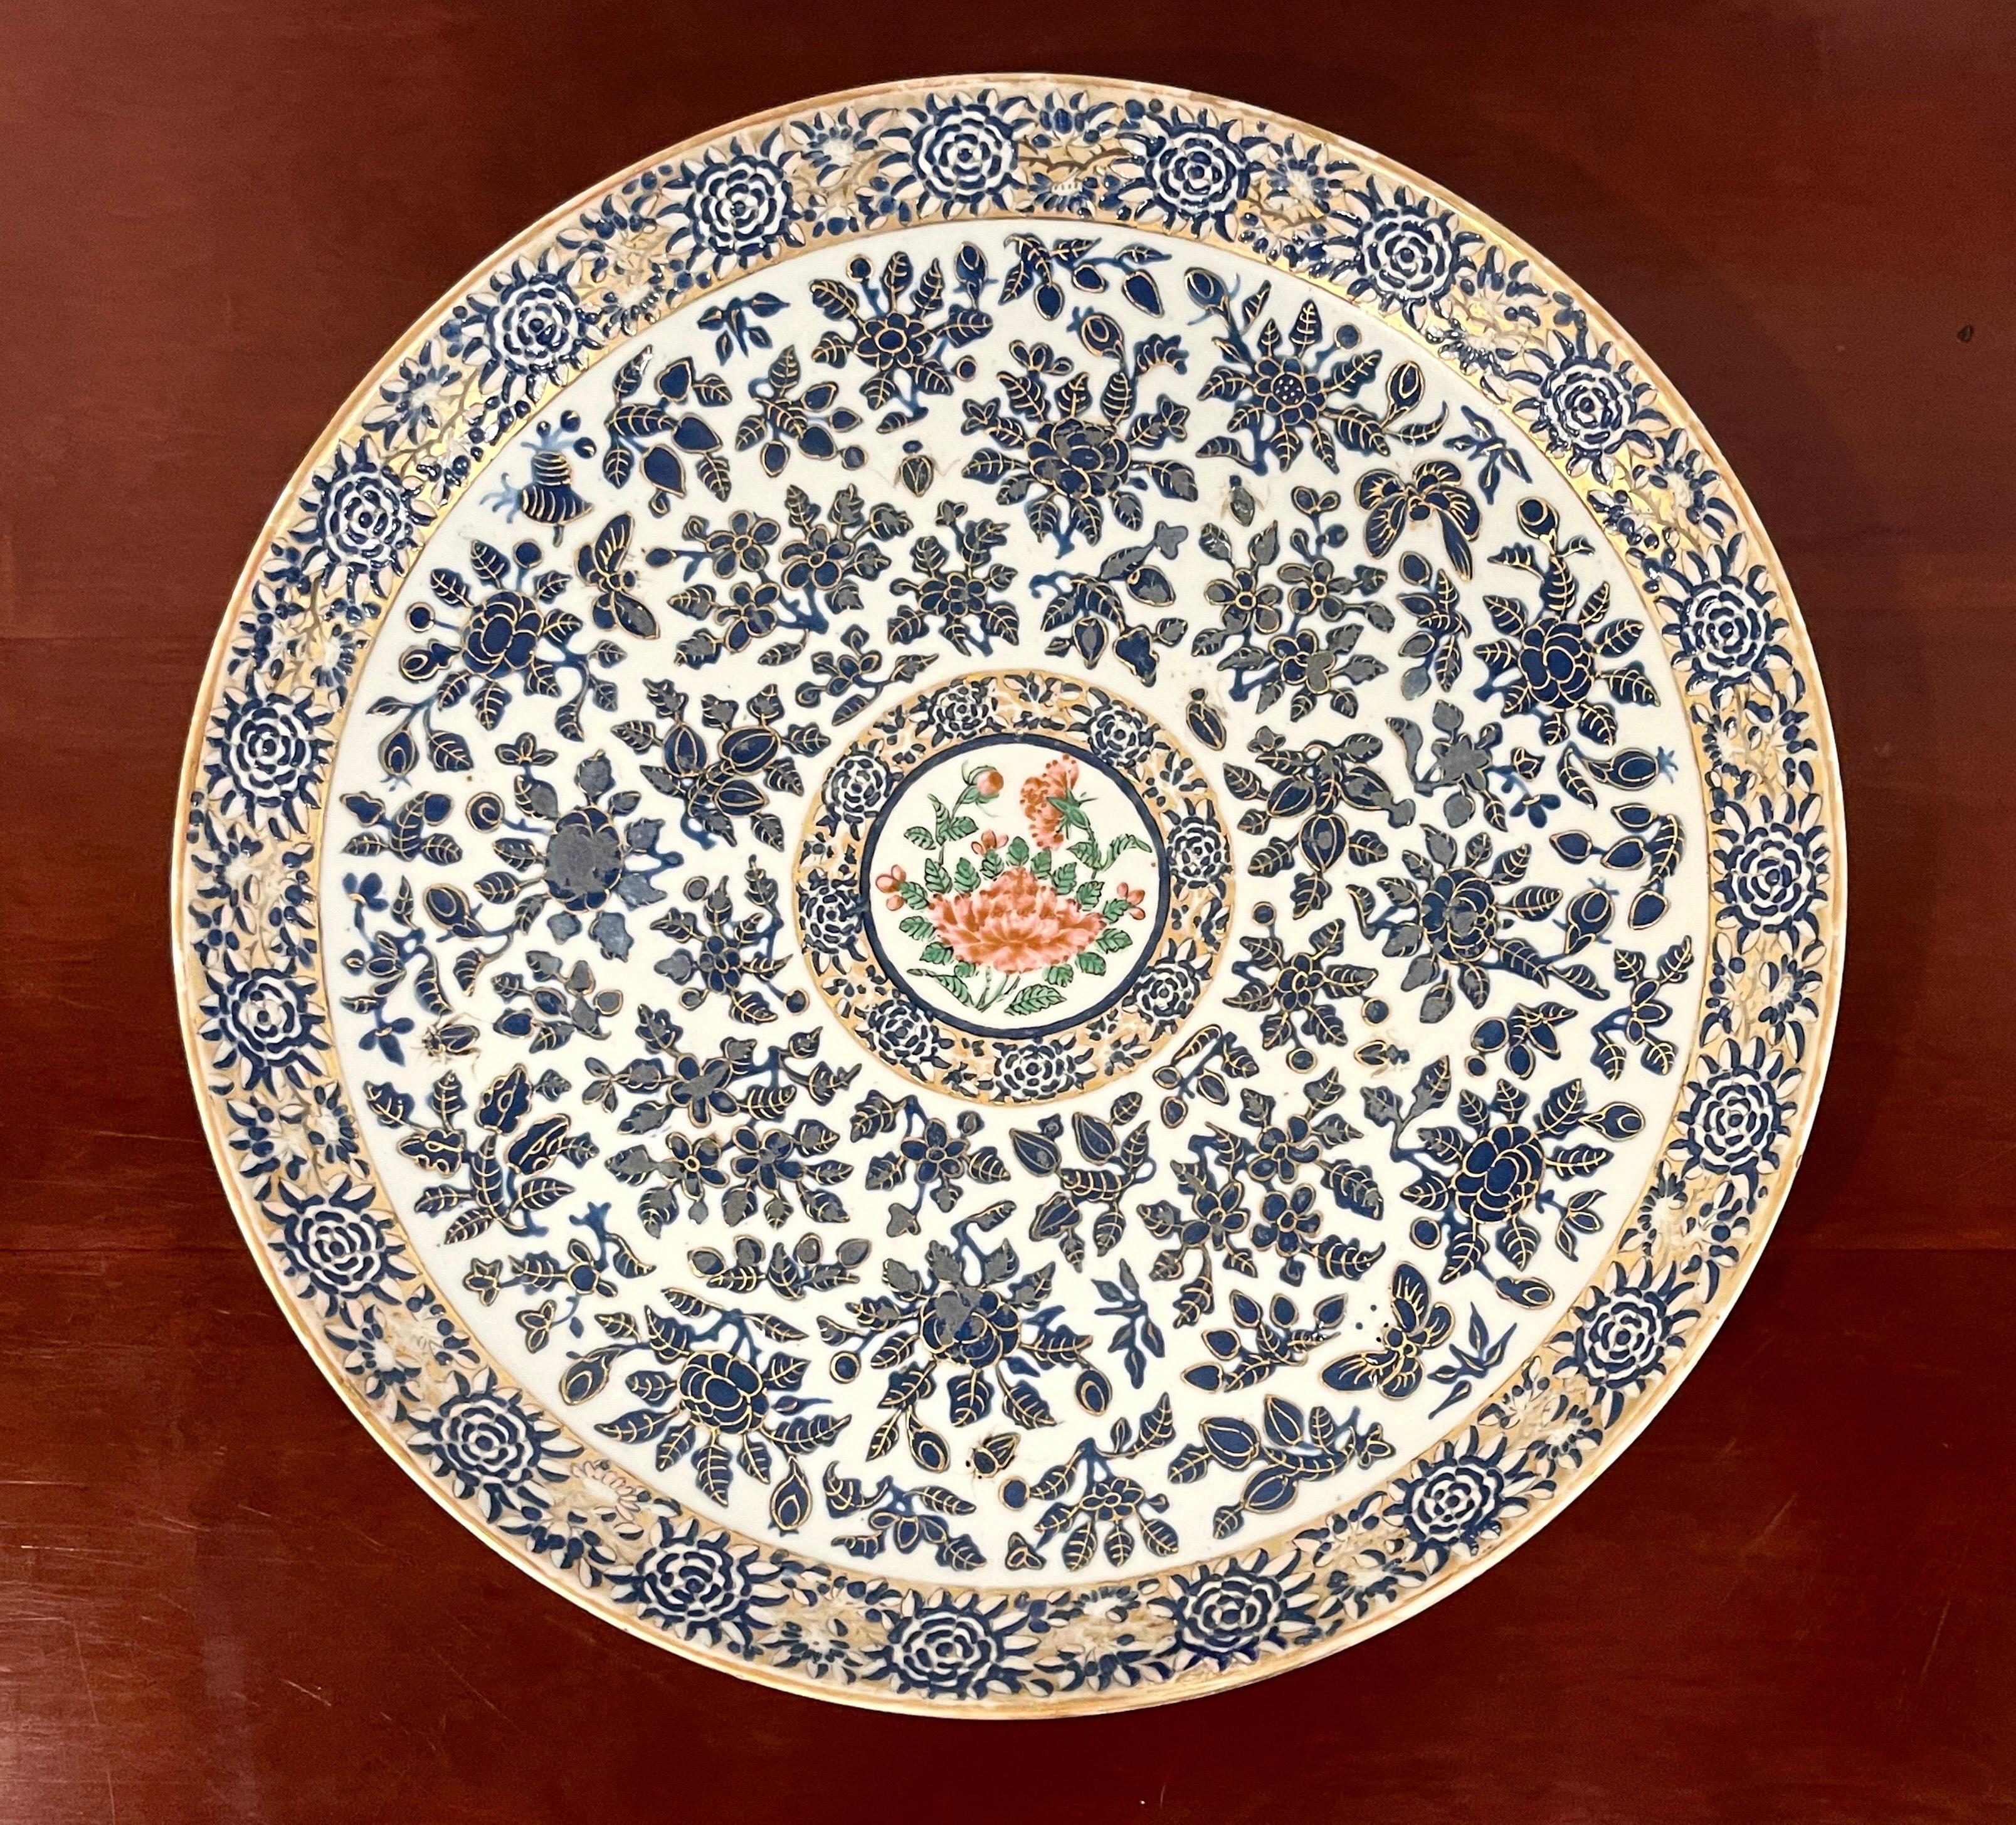 19th Century Chinese Rose Famille decorated Chrysanthemum motif charger 
China, Circa 1850s

A large and unique work with non typical continuous decoration. Of circular form with a wide decorated blue and white and gilt Chrysanthemum border, the